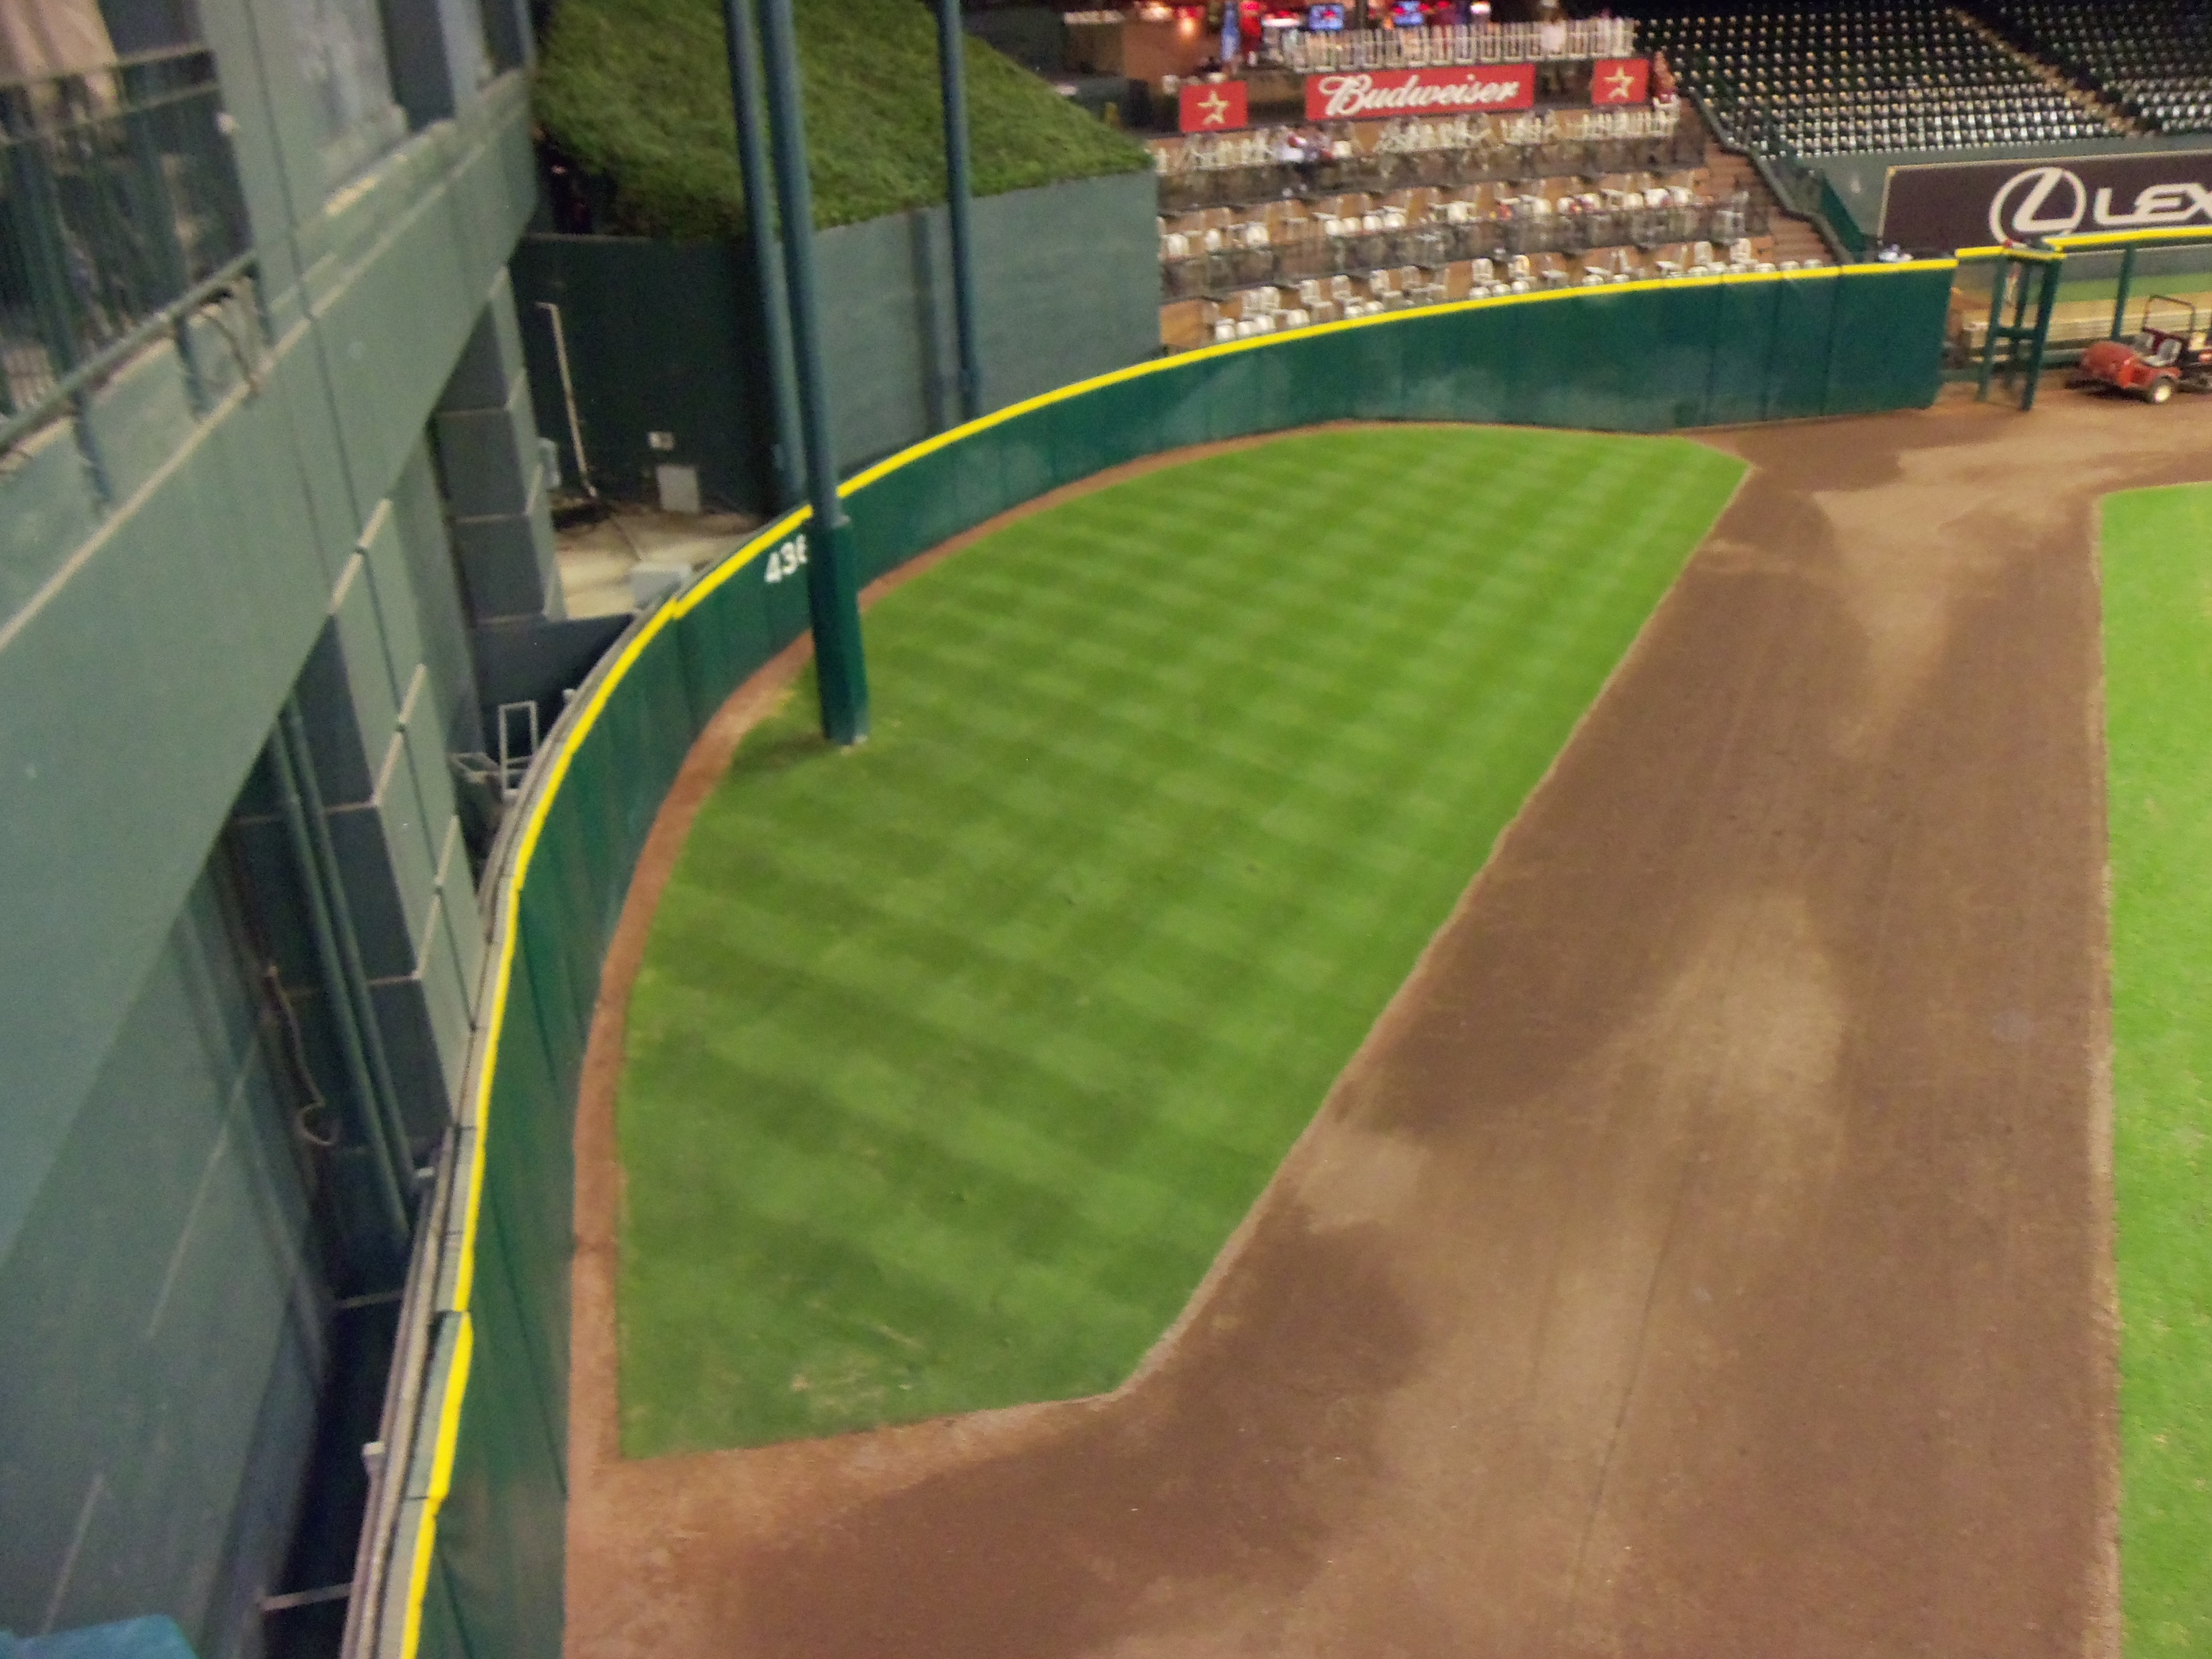 Houston Astros to get rid of Tal's Hill, flagpole after 2015 season - ESPN